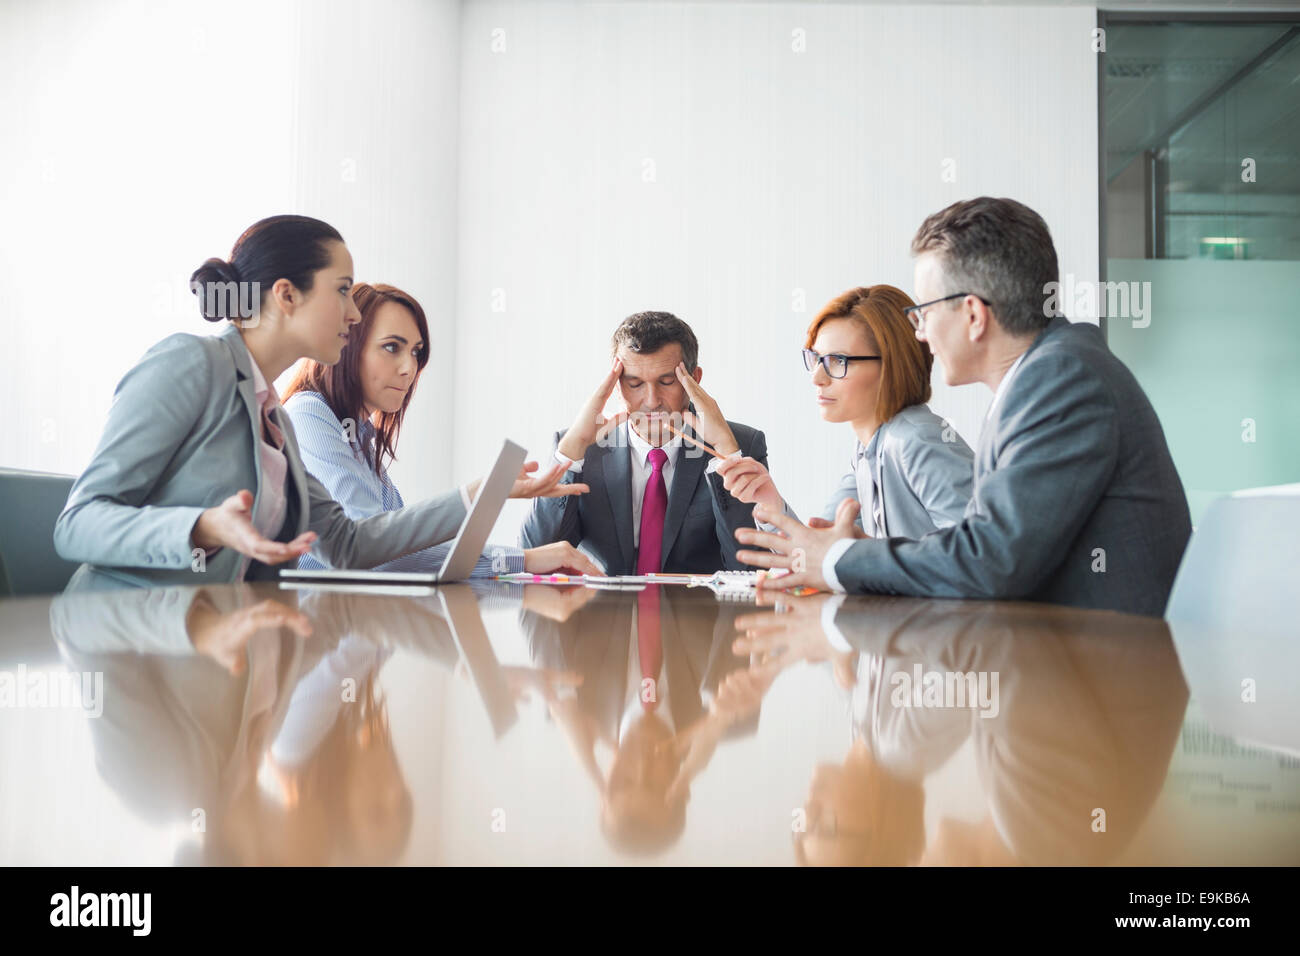 Businesspeople arguing in meeting Stock Photo